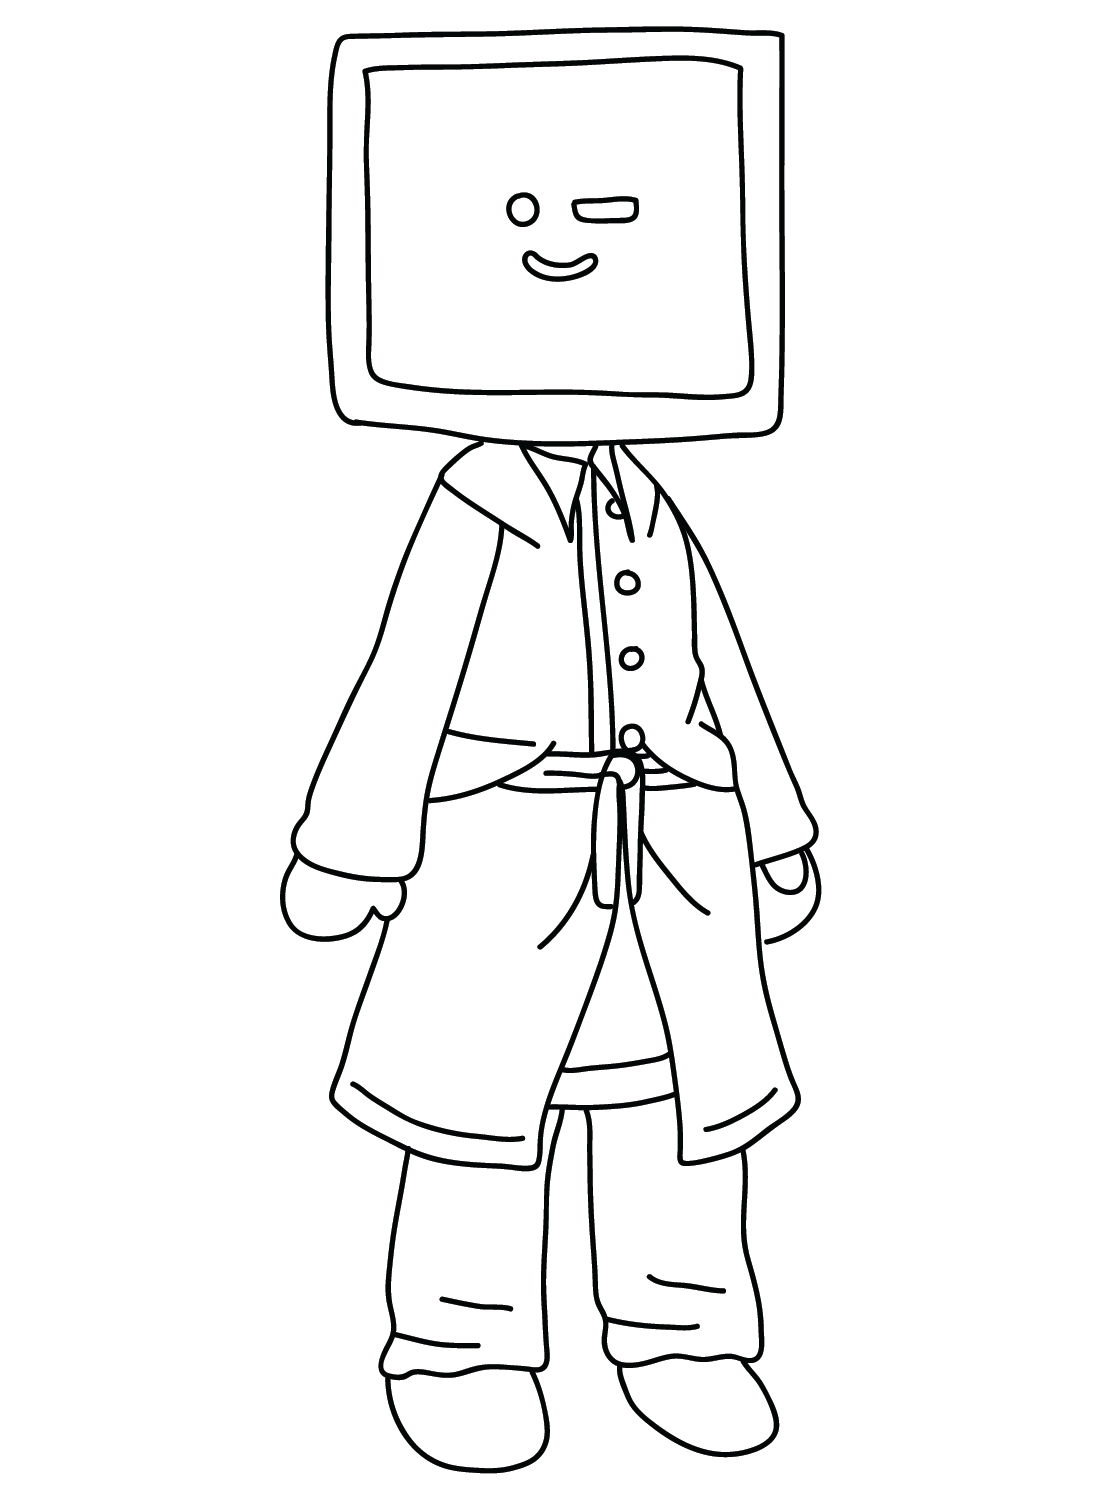 Coloring Sheet TV Man Free Printable Coloring Pages